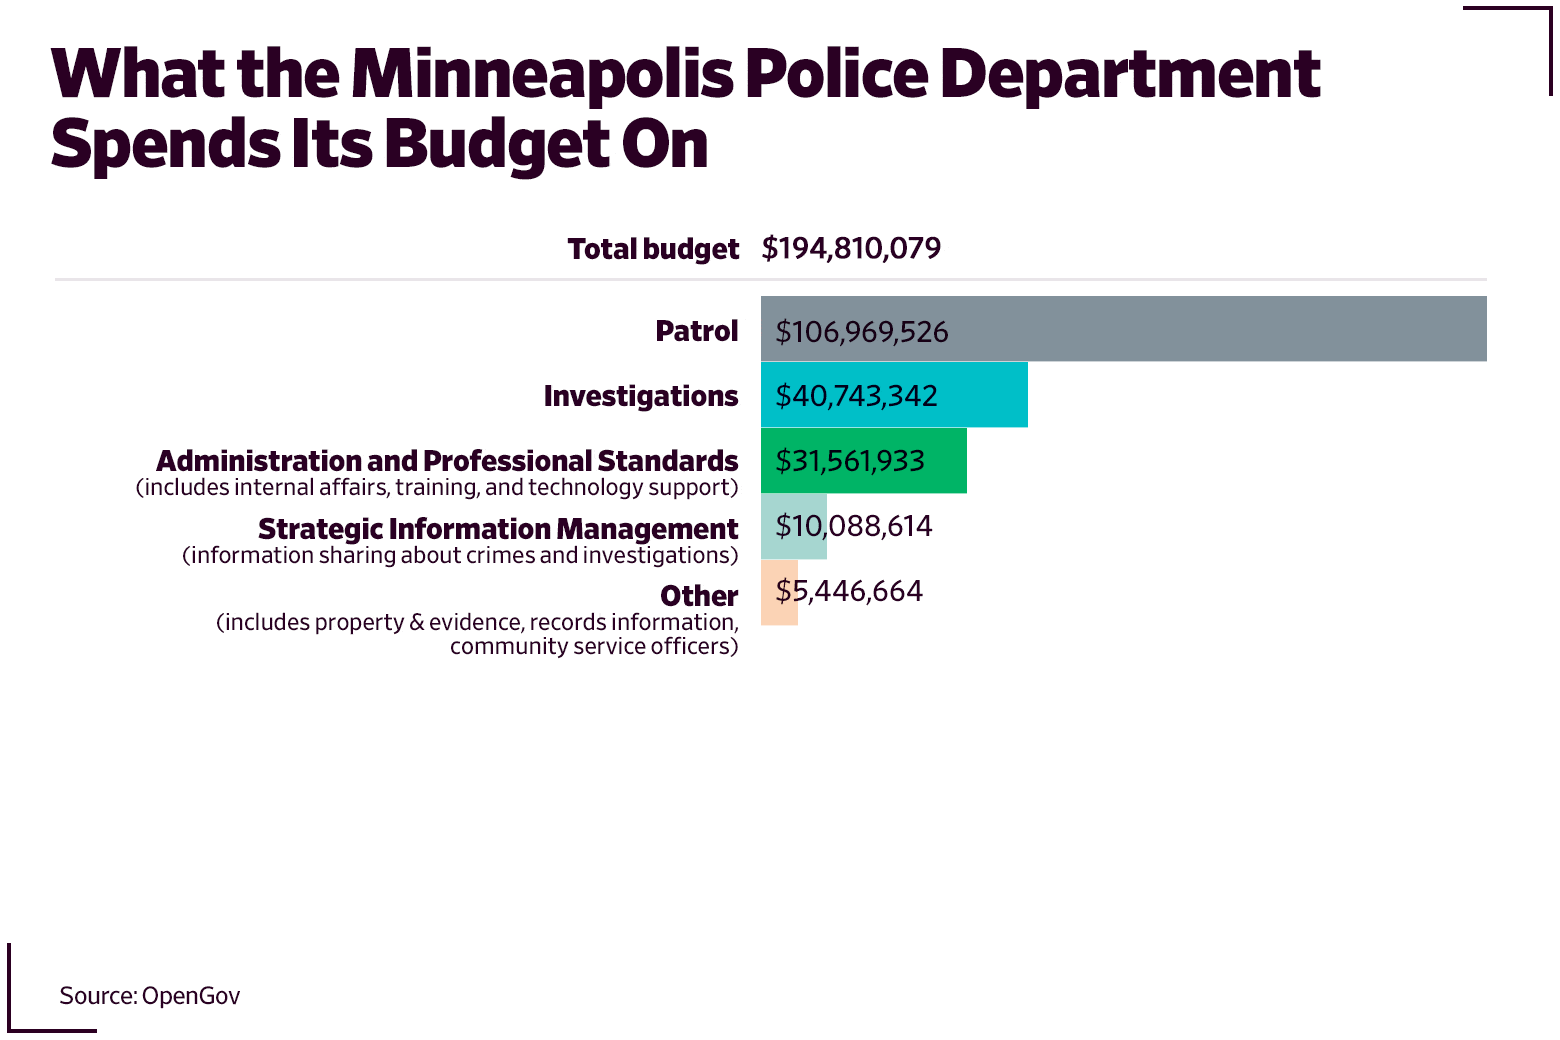 Bar graph showing what the Minneapolis Police Department spends its budget on